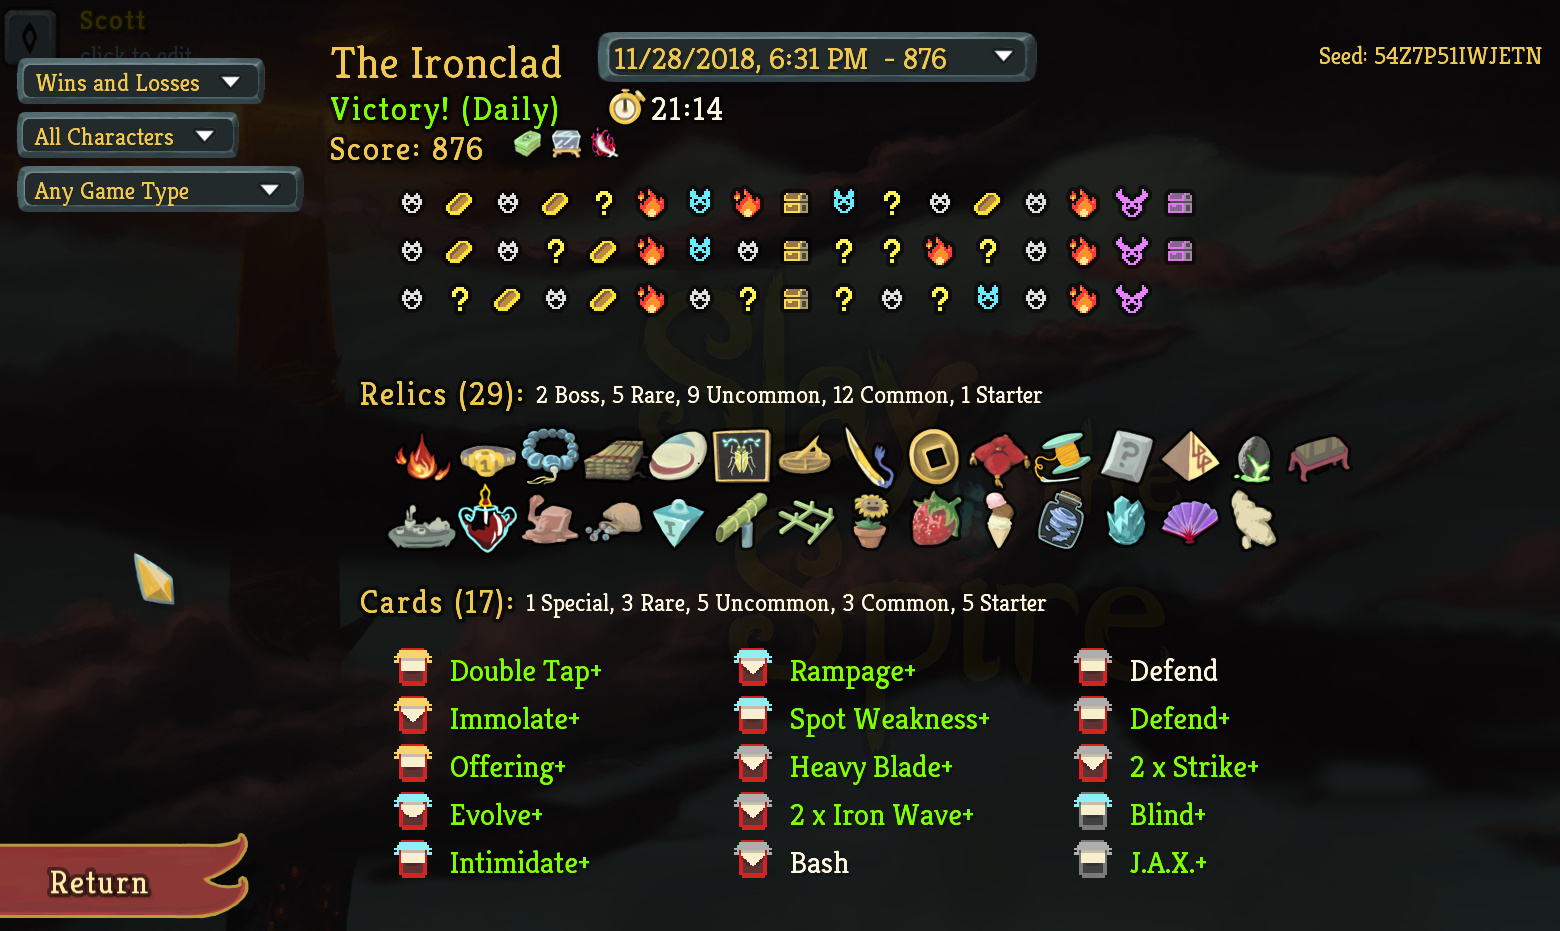 slay the spire dead branch